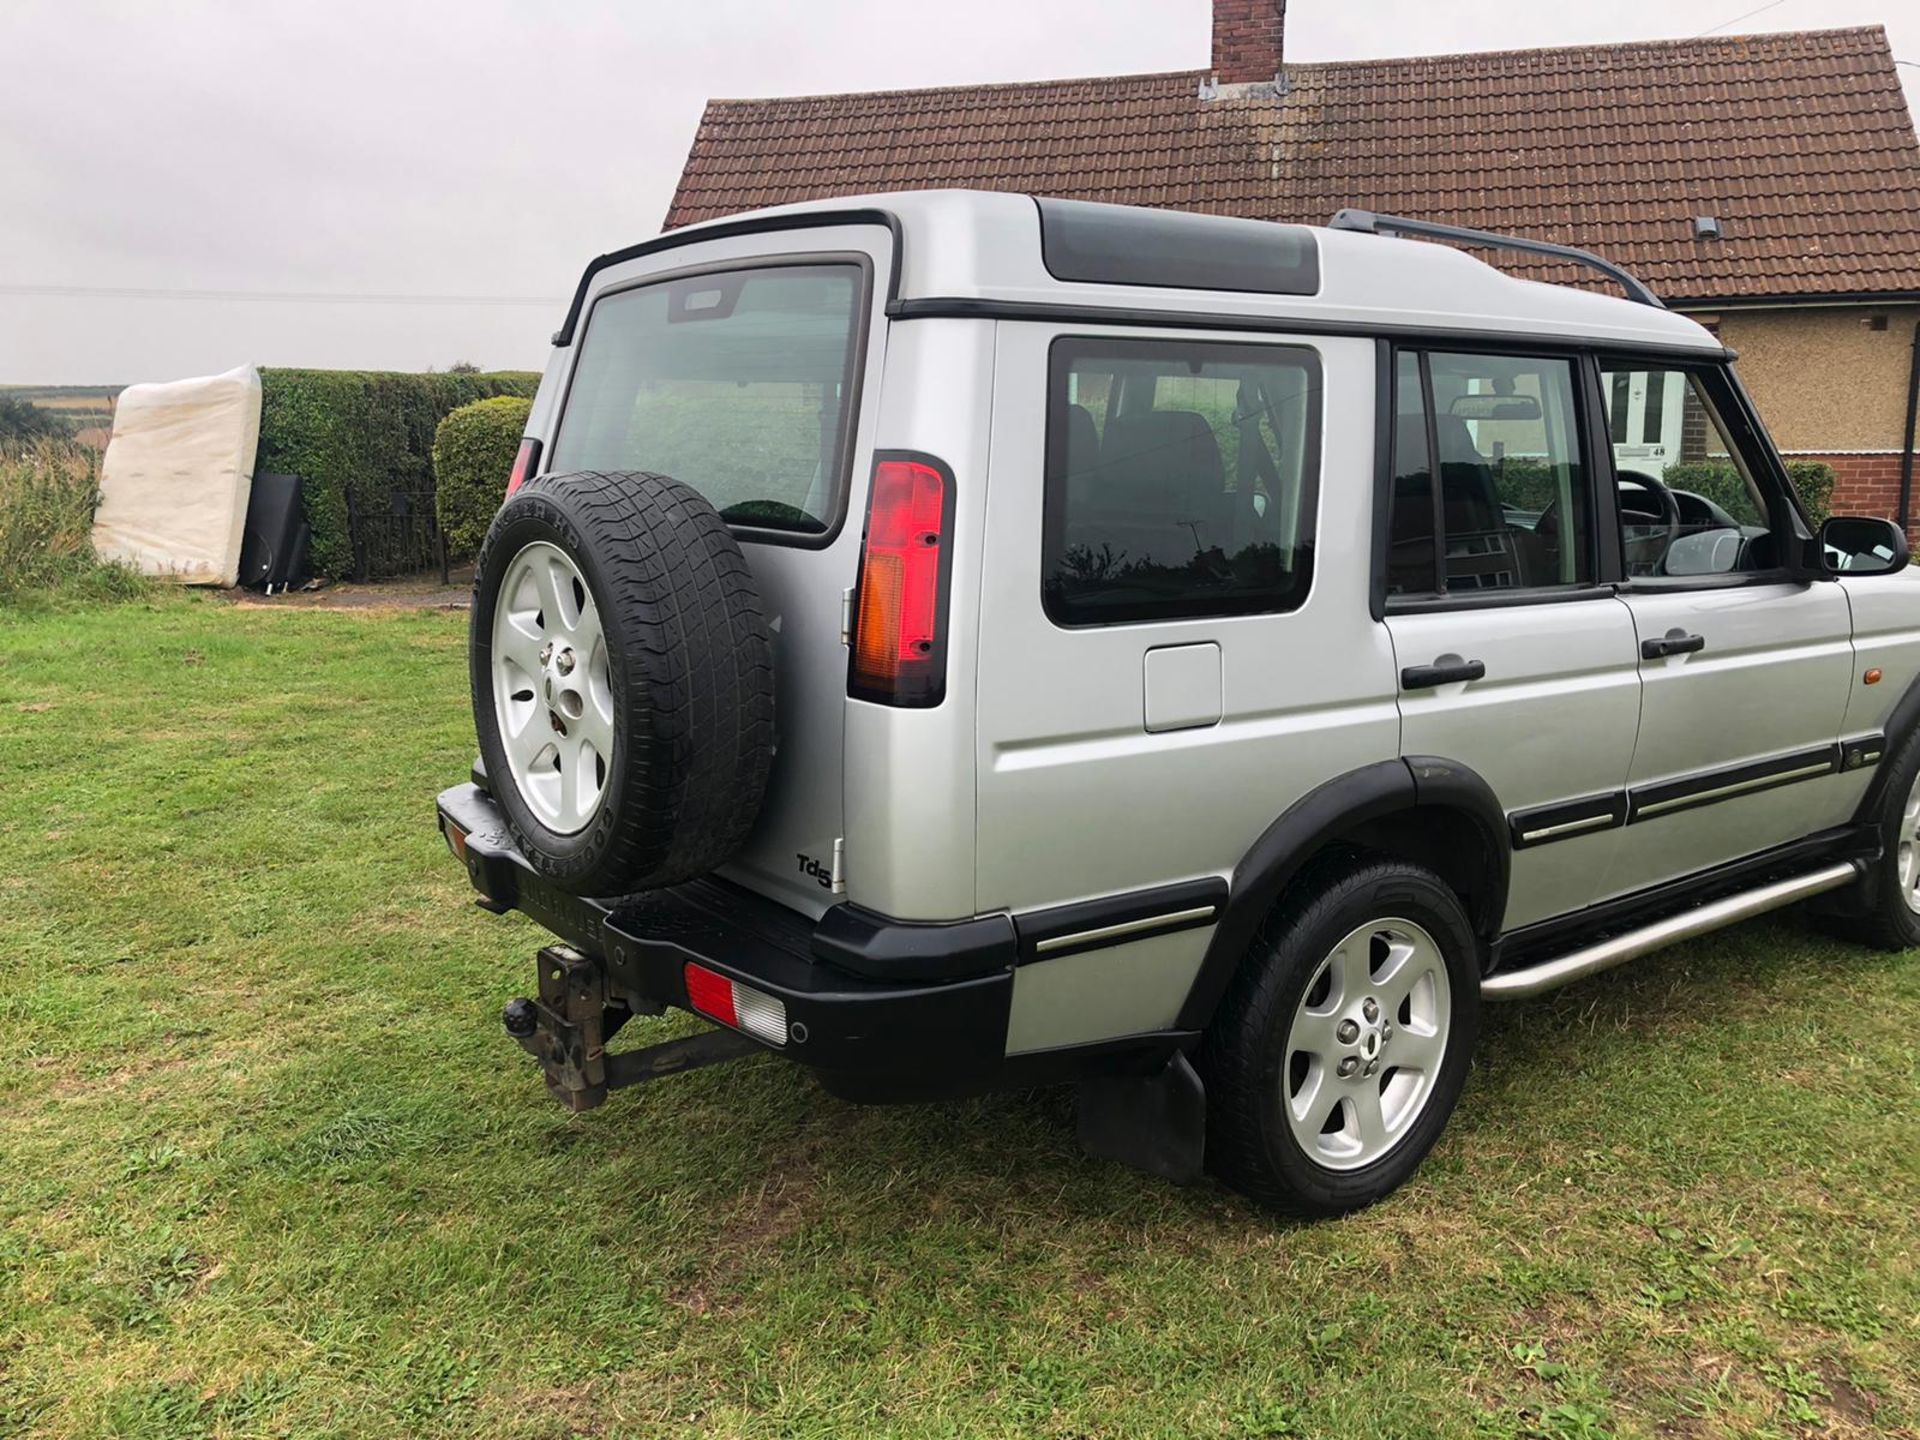 2002 LAND ROVER DISCOVERY TD5 ES AUTO SILVER 7 SEATER ESTATE, 2.5 DIESEL, 160K MILES *NO VAT* - Image 7 of 18